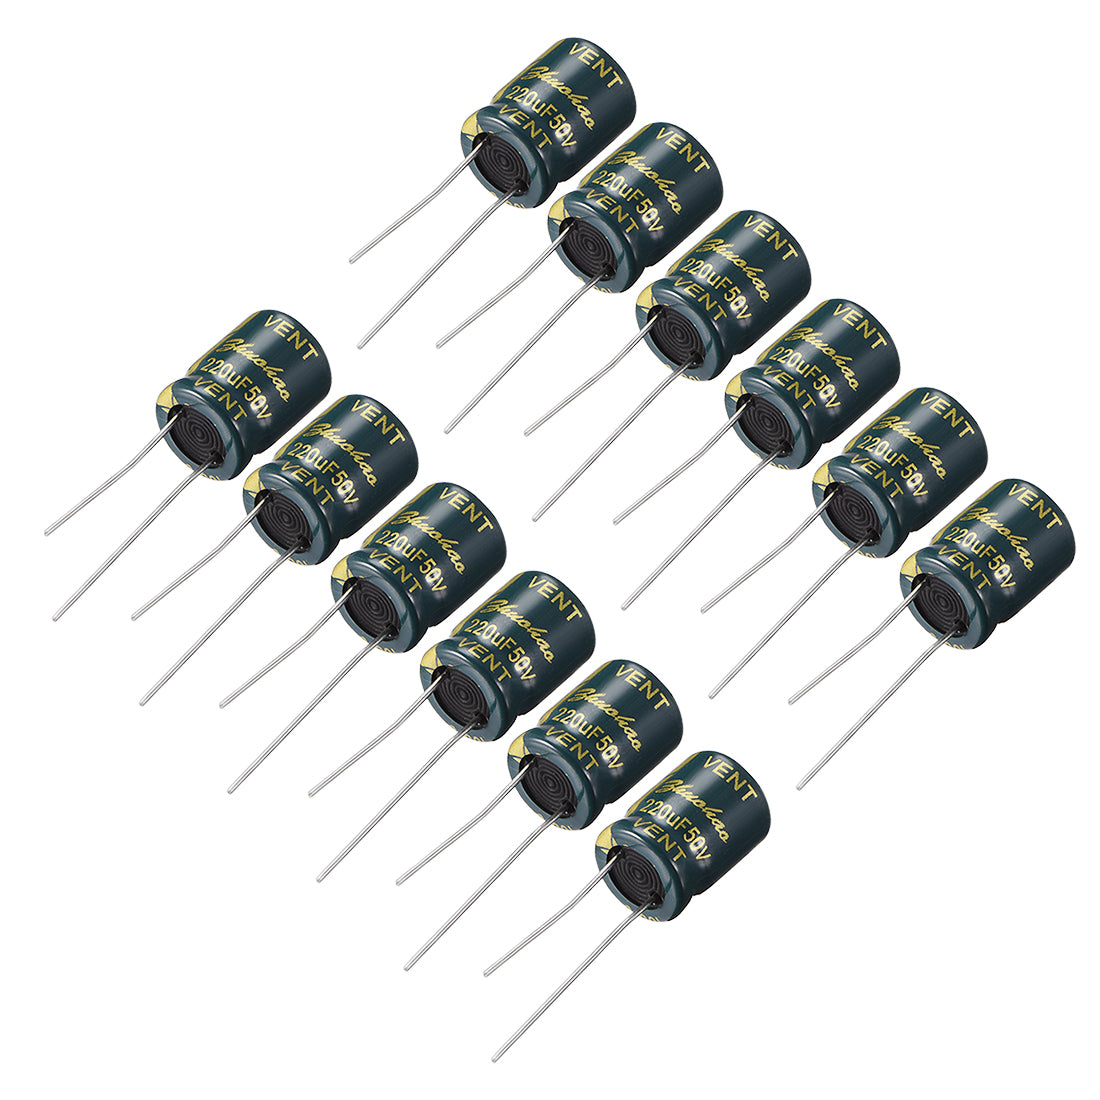 uxcell Uxcell Aluminum Radial Electrolytic Capacitor Low ESR Green with 220UF 50V 105 Celsius Life 3000H 10 x 13 mm High Ripple Current,Low Impedance 12pcs